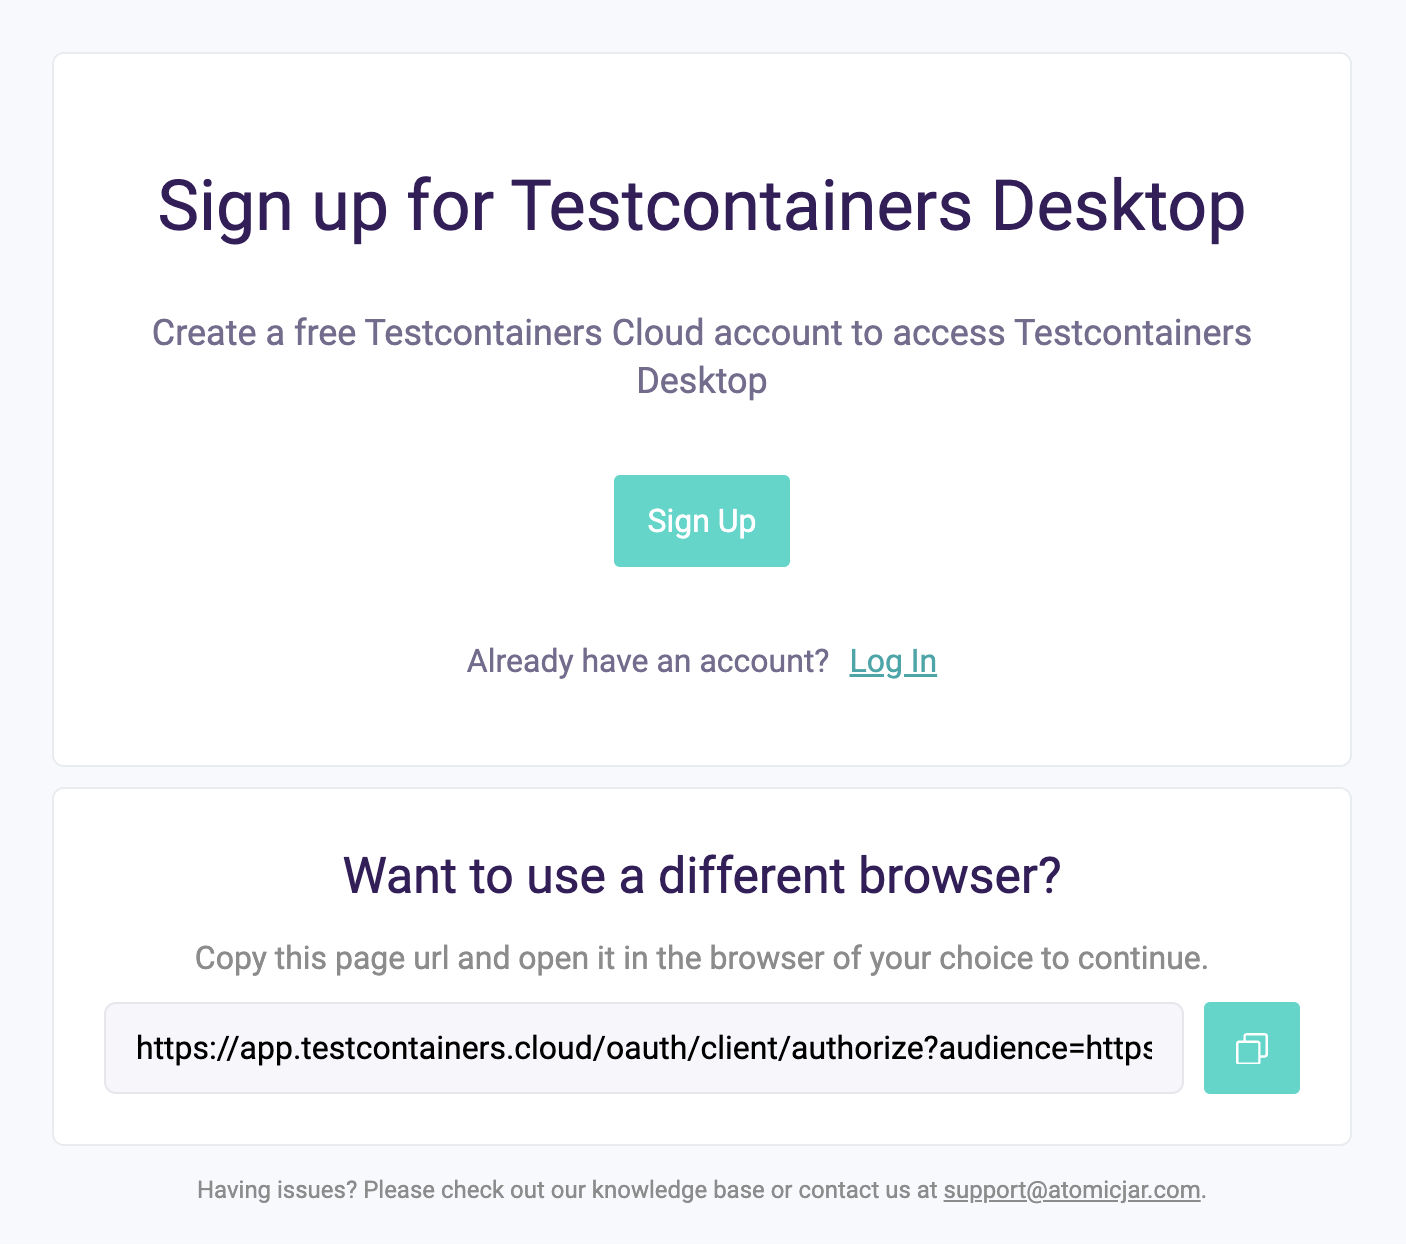 Testcontainers Desktop Sign Up